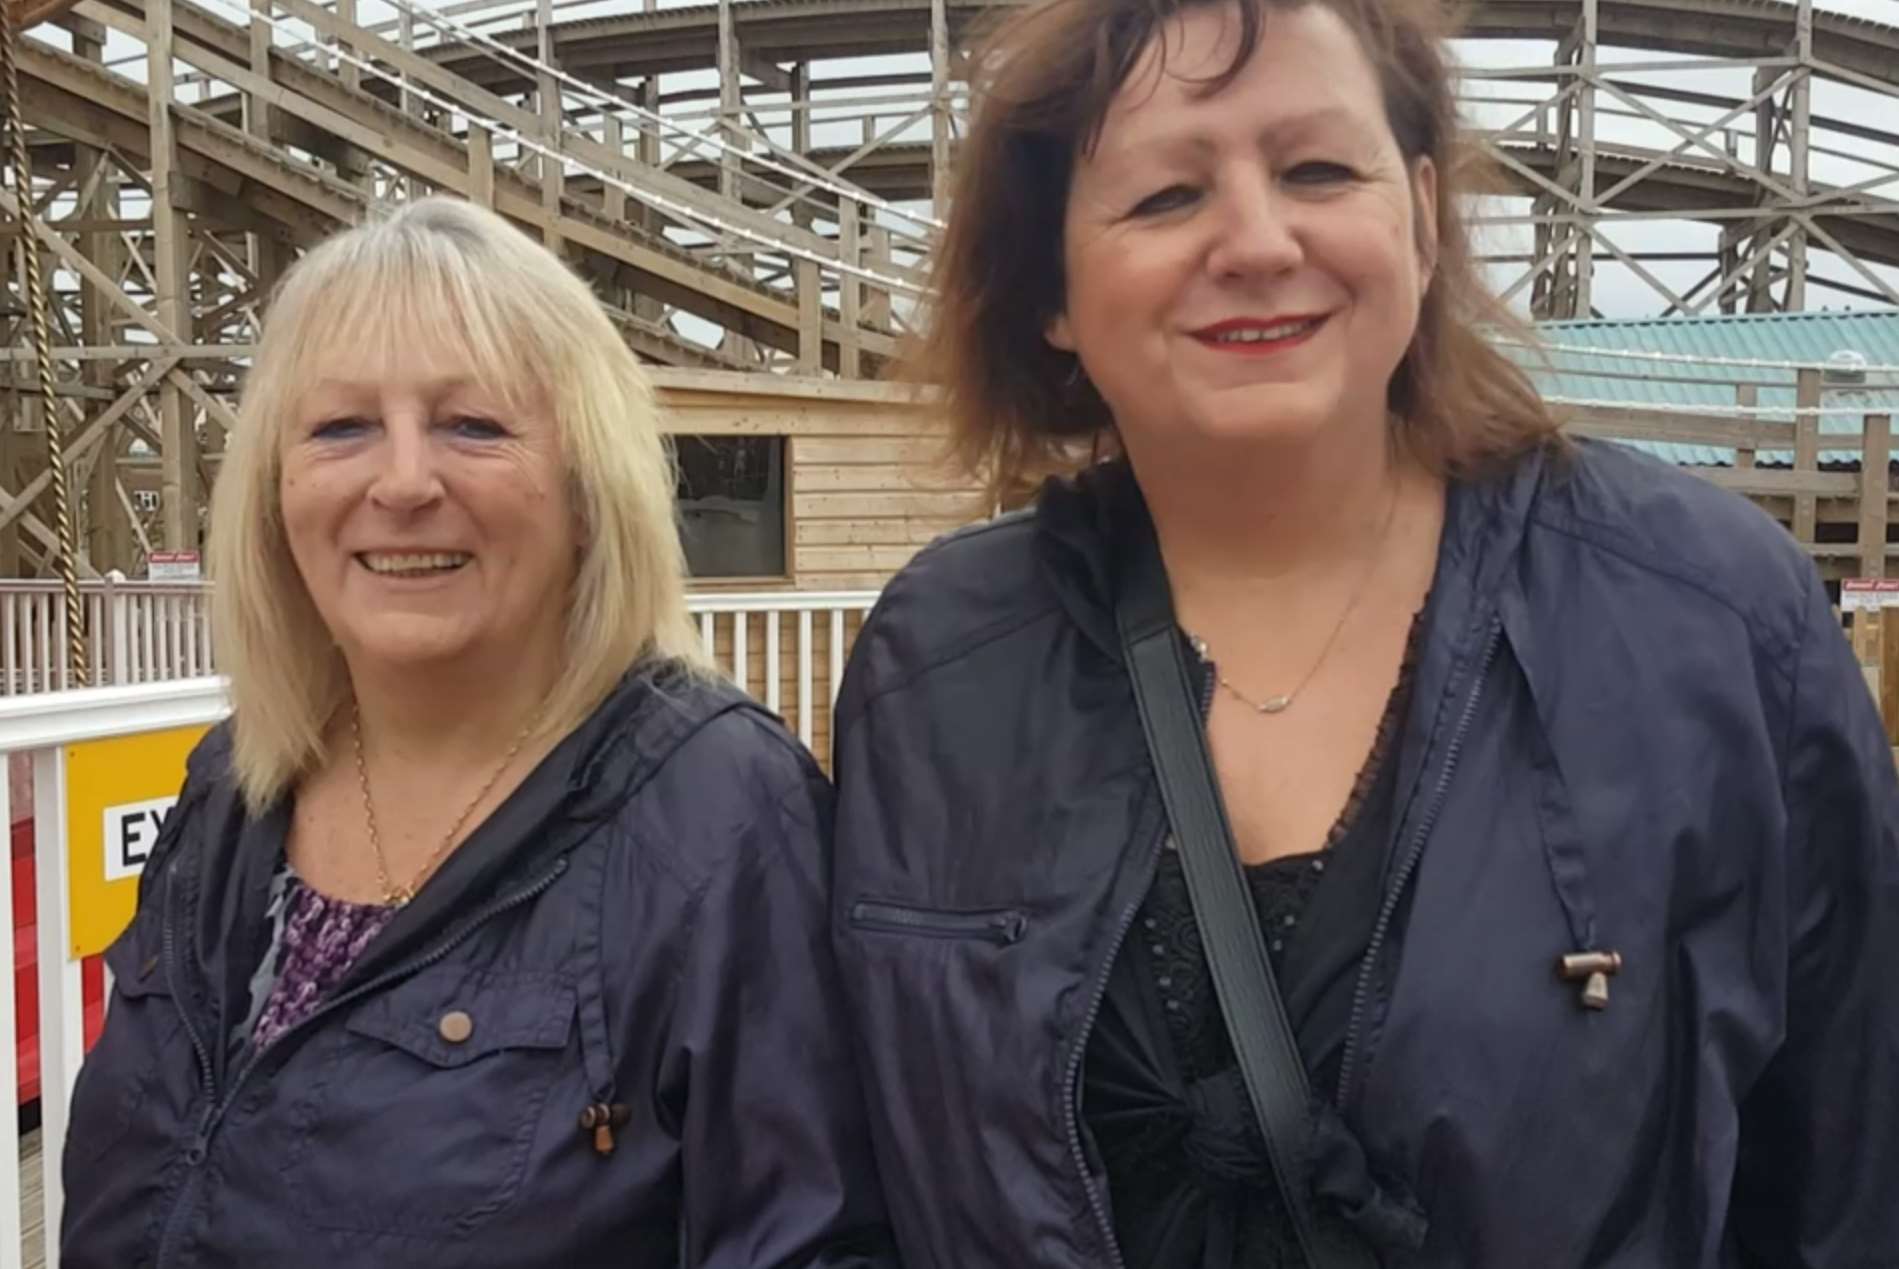 Valerie Cotton and Simone Dutton agreed that free entry to the park was the right way to go